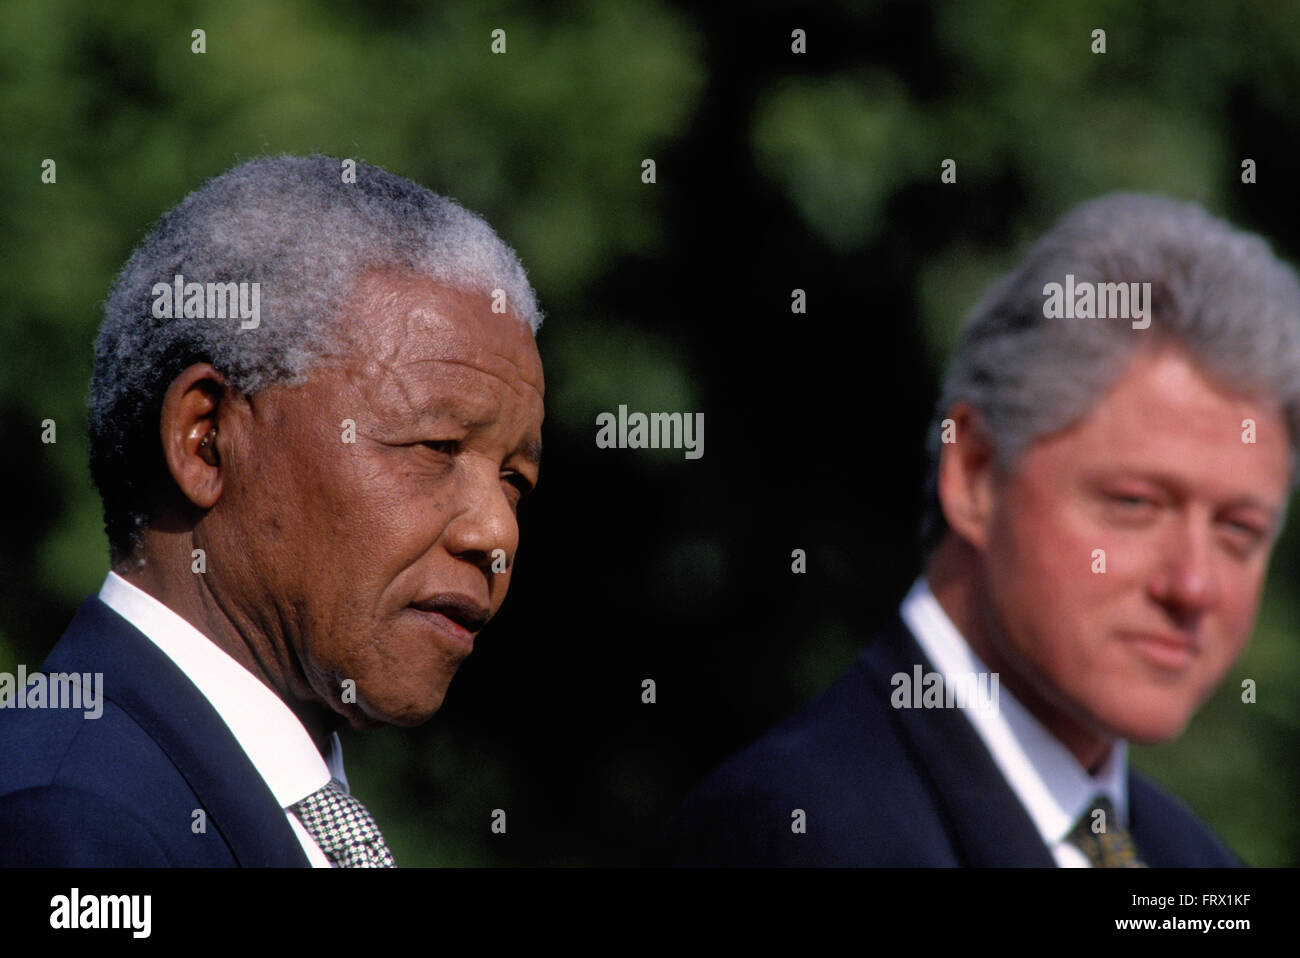 Washington, DC., USA, 5th October, 1994 President William Jefferson Clinton hosts South African President Nelson Mandella at the White House. Mandella was a South African anti-apartheid revolutionary, politician and philanthropist who served as President of South Africa from 1994 to 1999. He was South Africa's first black chief executive, and the first elected in a fully representative democratic election. His government focused on dismantling the legacy of apartheid through tackling institutionalized racism, poverty and inequality, and fostering racial reconciliation.  Credit: Mark Reinstein Stock Photo